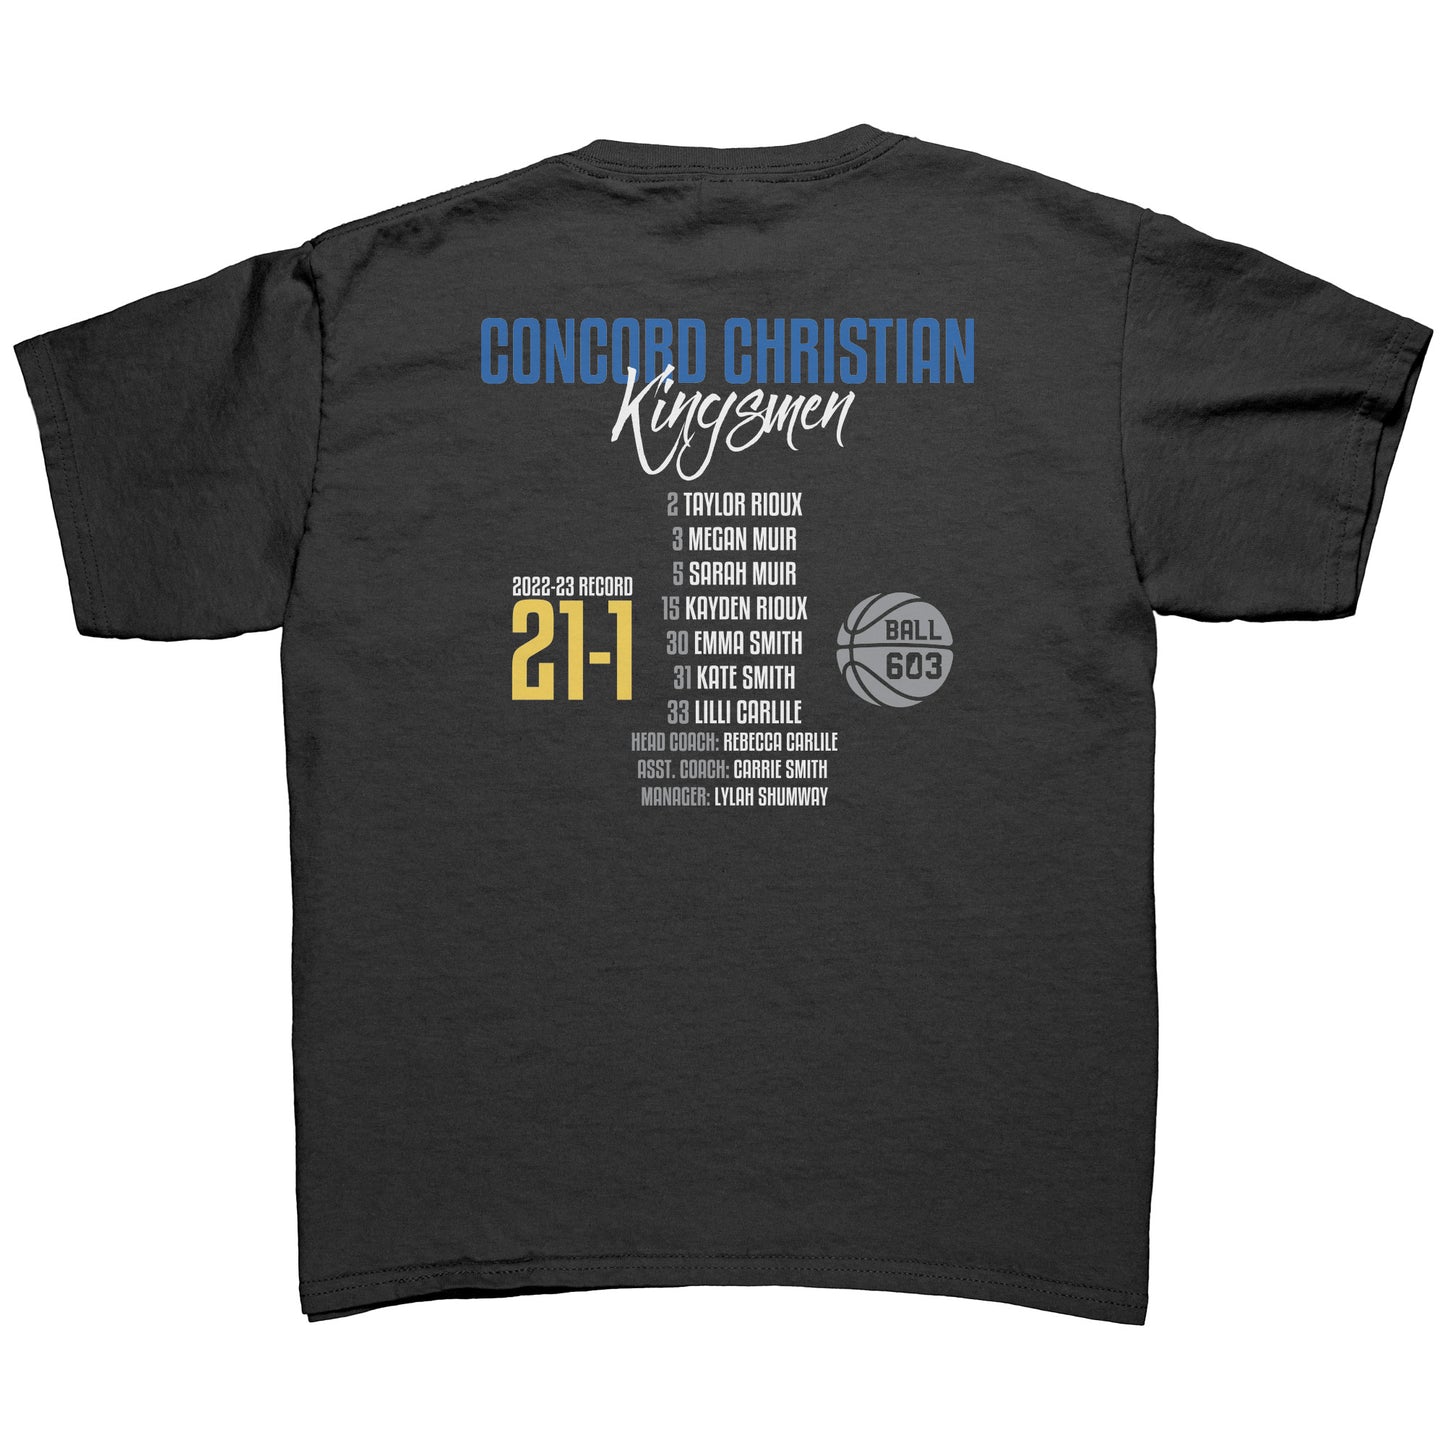 Concord Christian Back to Back Champs: Youth T-Shirt